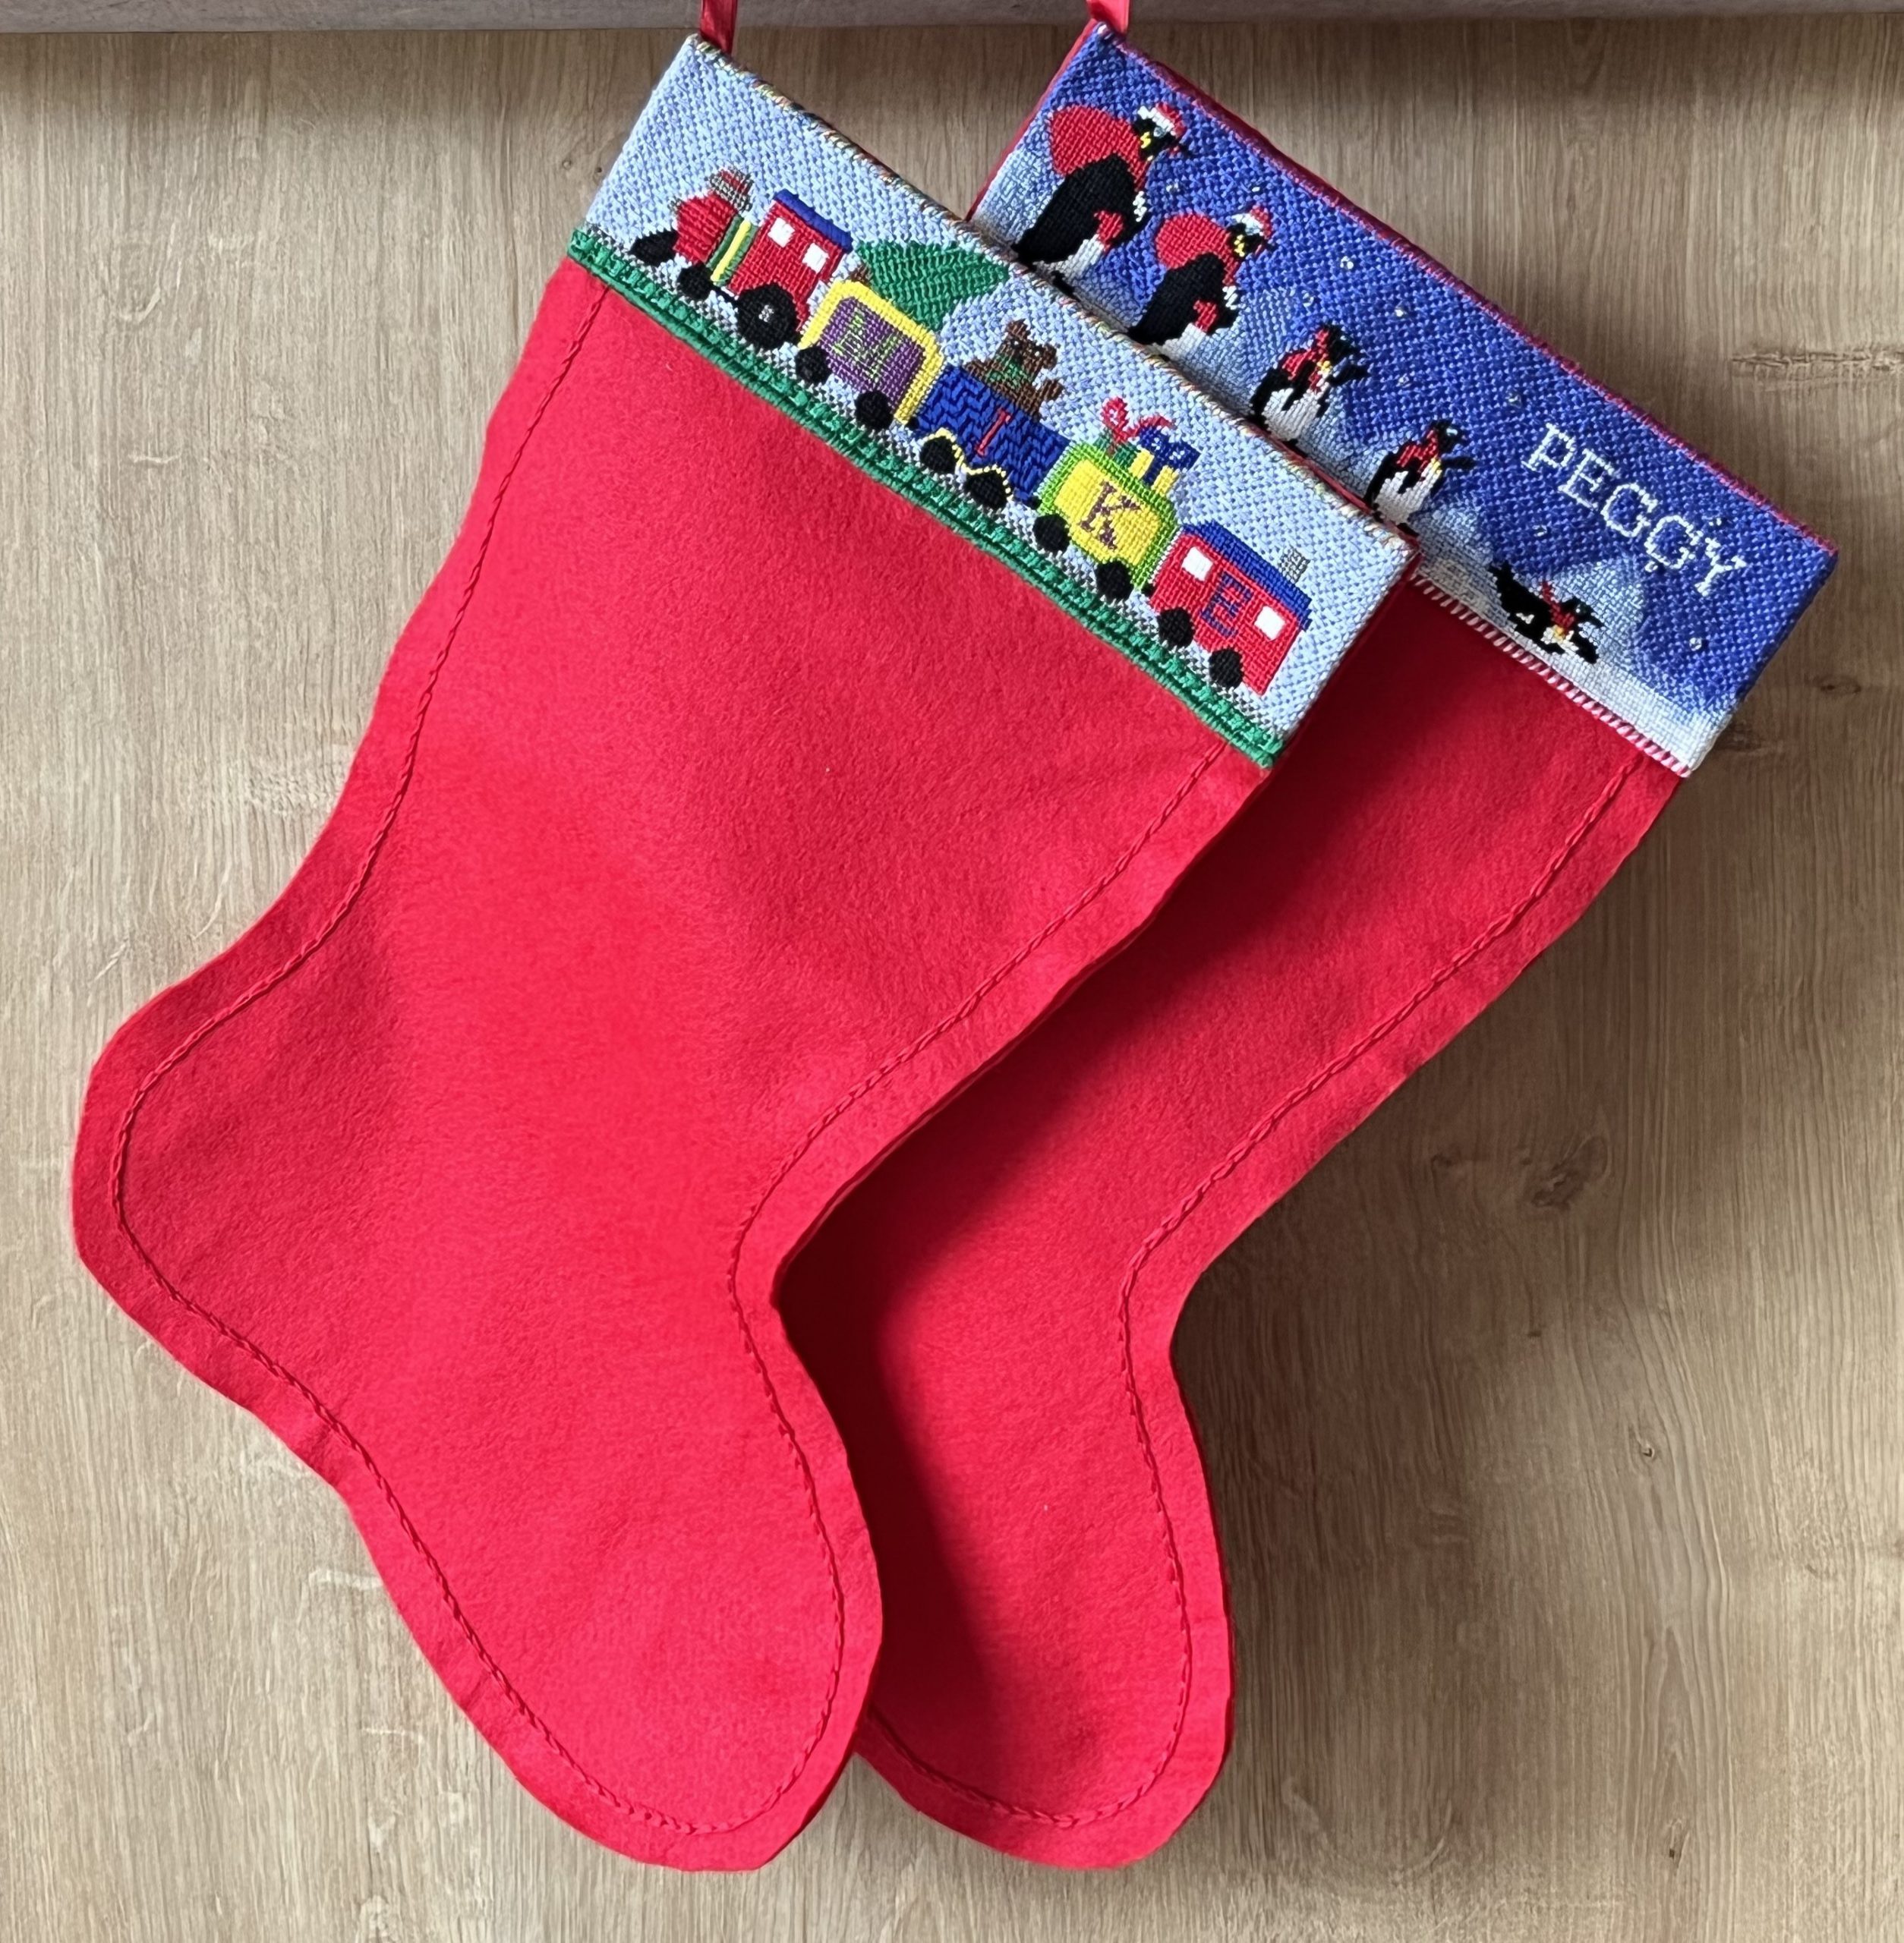 Christmas Stockings and Cuffs